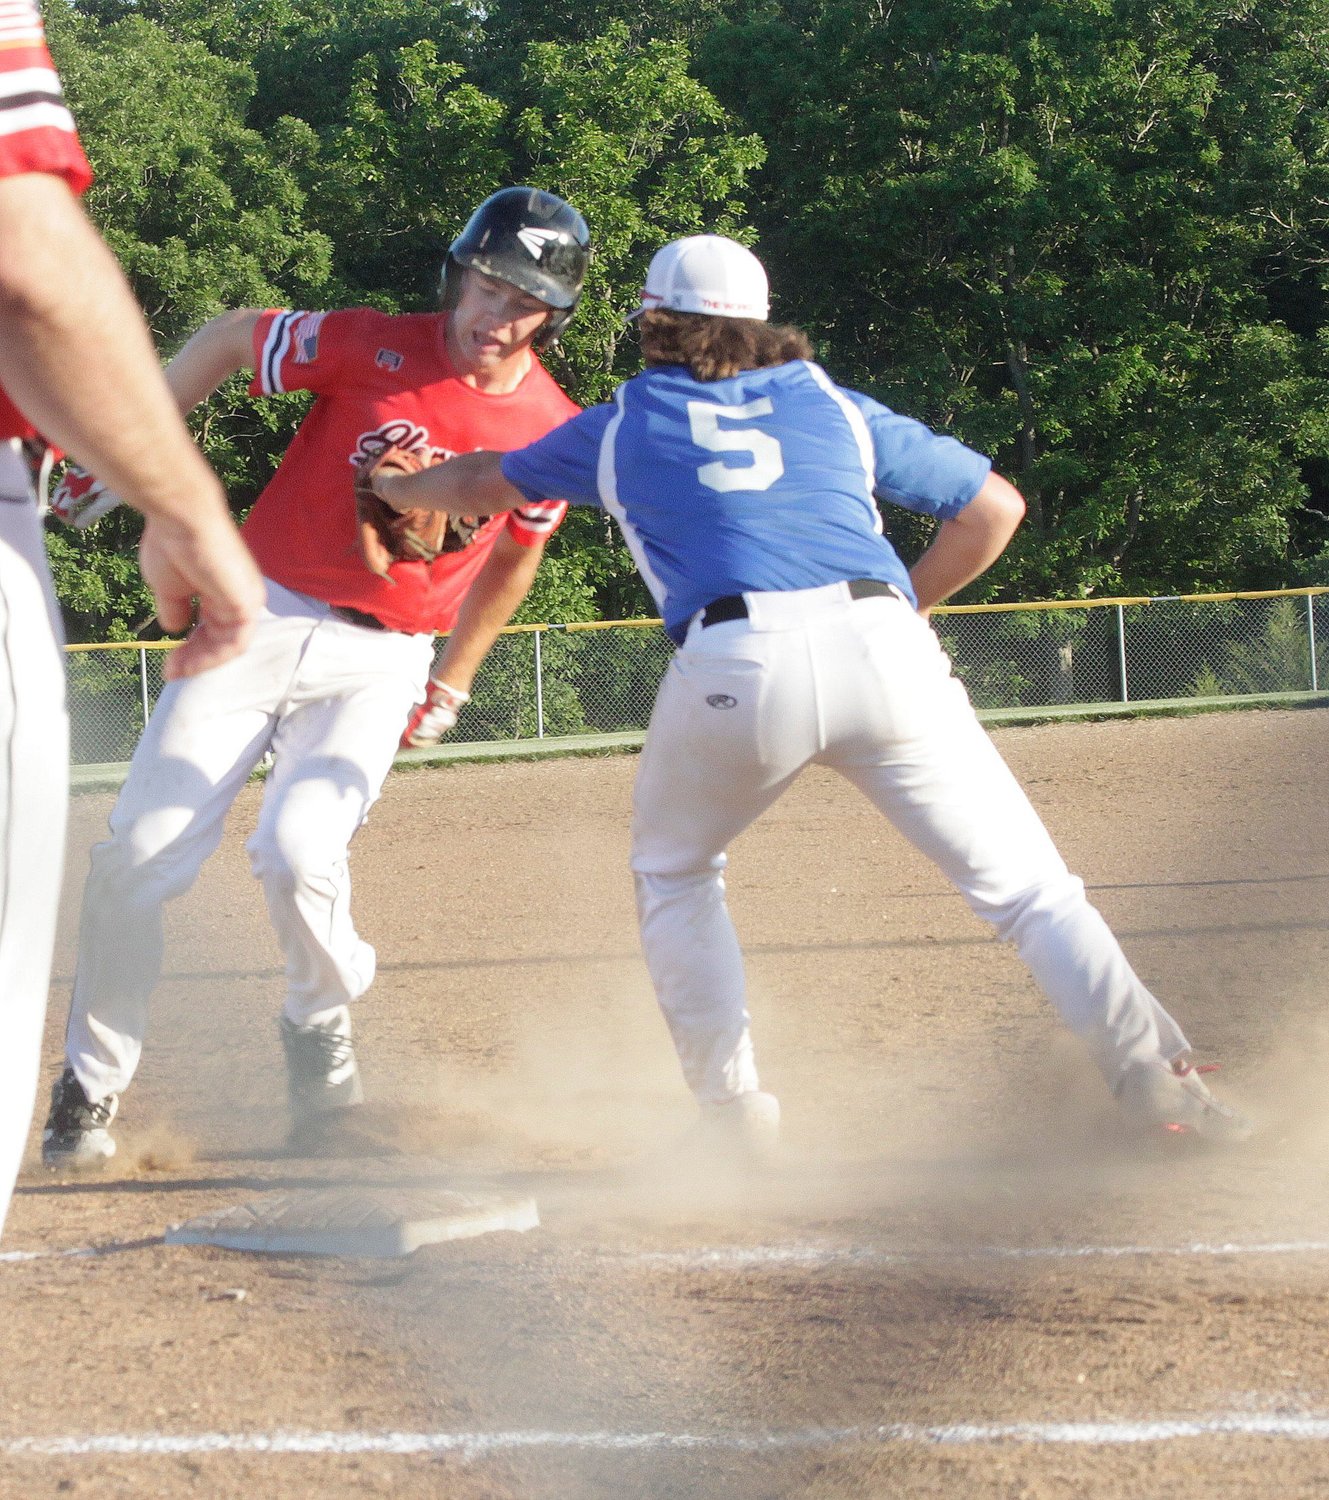 NEMO Post 6 Sixers third baseman Tanner Pipes places a tag to record an out on Hannibal Post 55 runner Mason Thorp when Thorp attempted to steal in the top of the third inning Wednesday. NEMO Sixers won the first game 4-3 but lost 12-9 to Hannibal in the second contest.